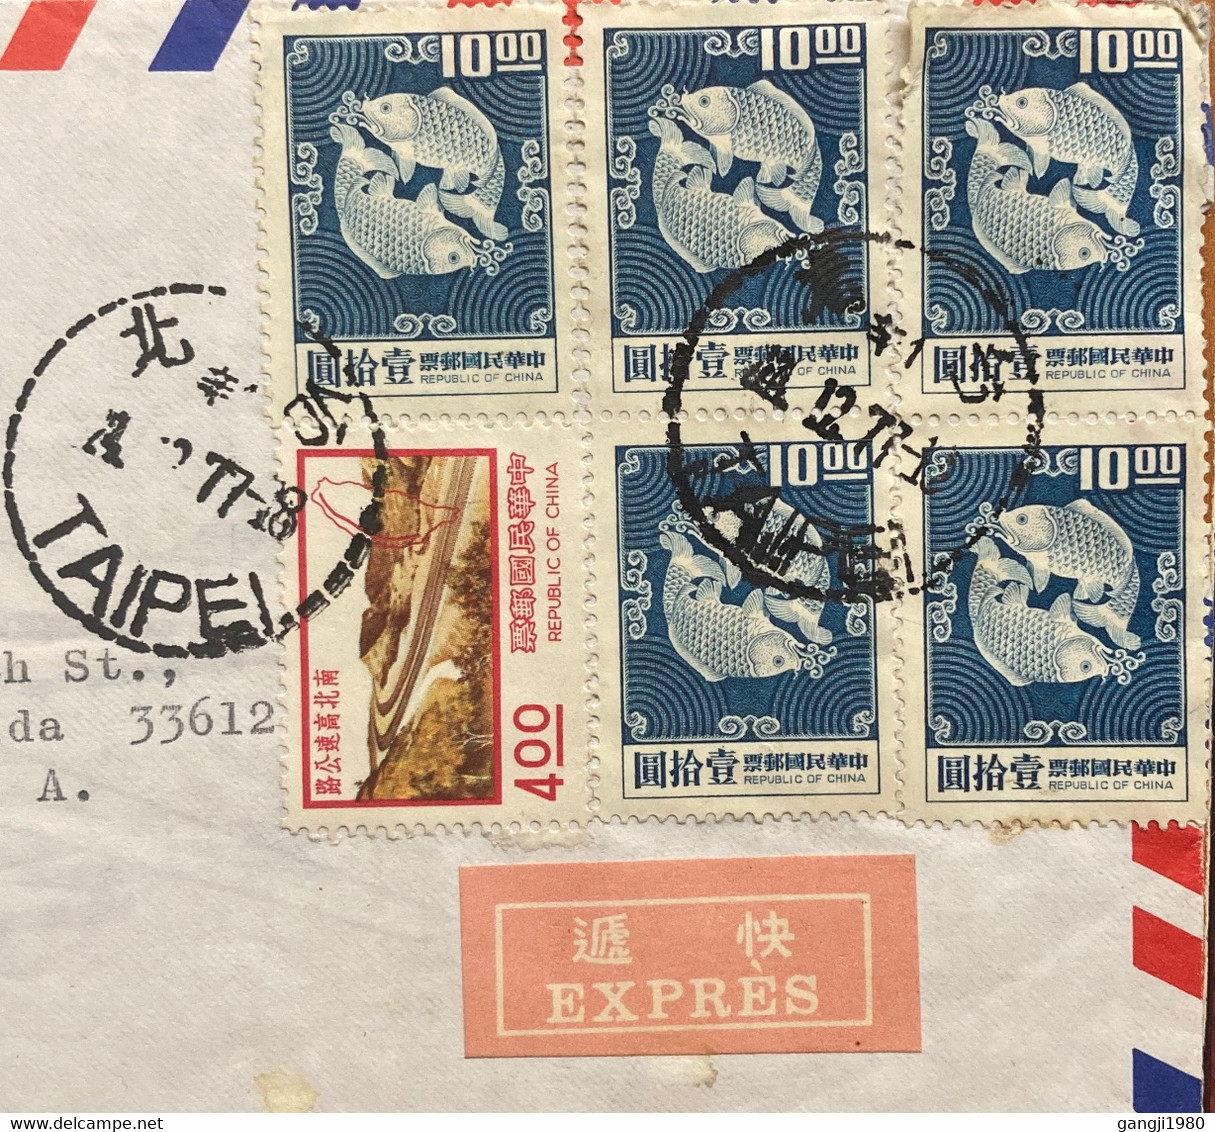 CHINA TAIWAN-1977, VIGNETTE “EXPRESS” LABEL USED COVER TO USA ,TUNG FOOK TRADING CO.ADVT PICTURE MATCHING FISH, SAME STA - Briefe U. Dokumente